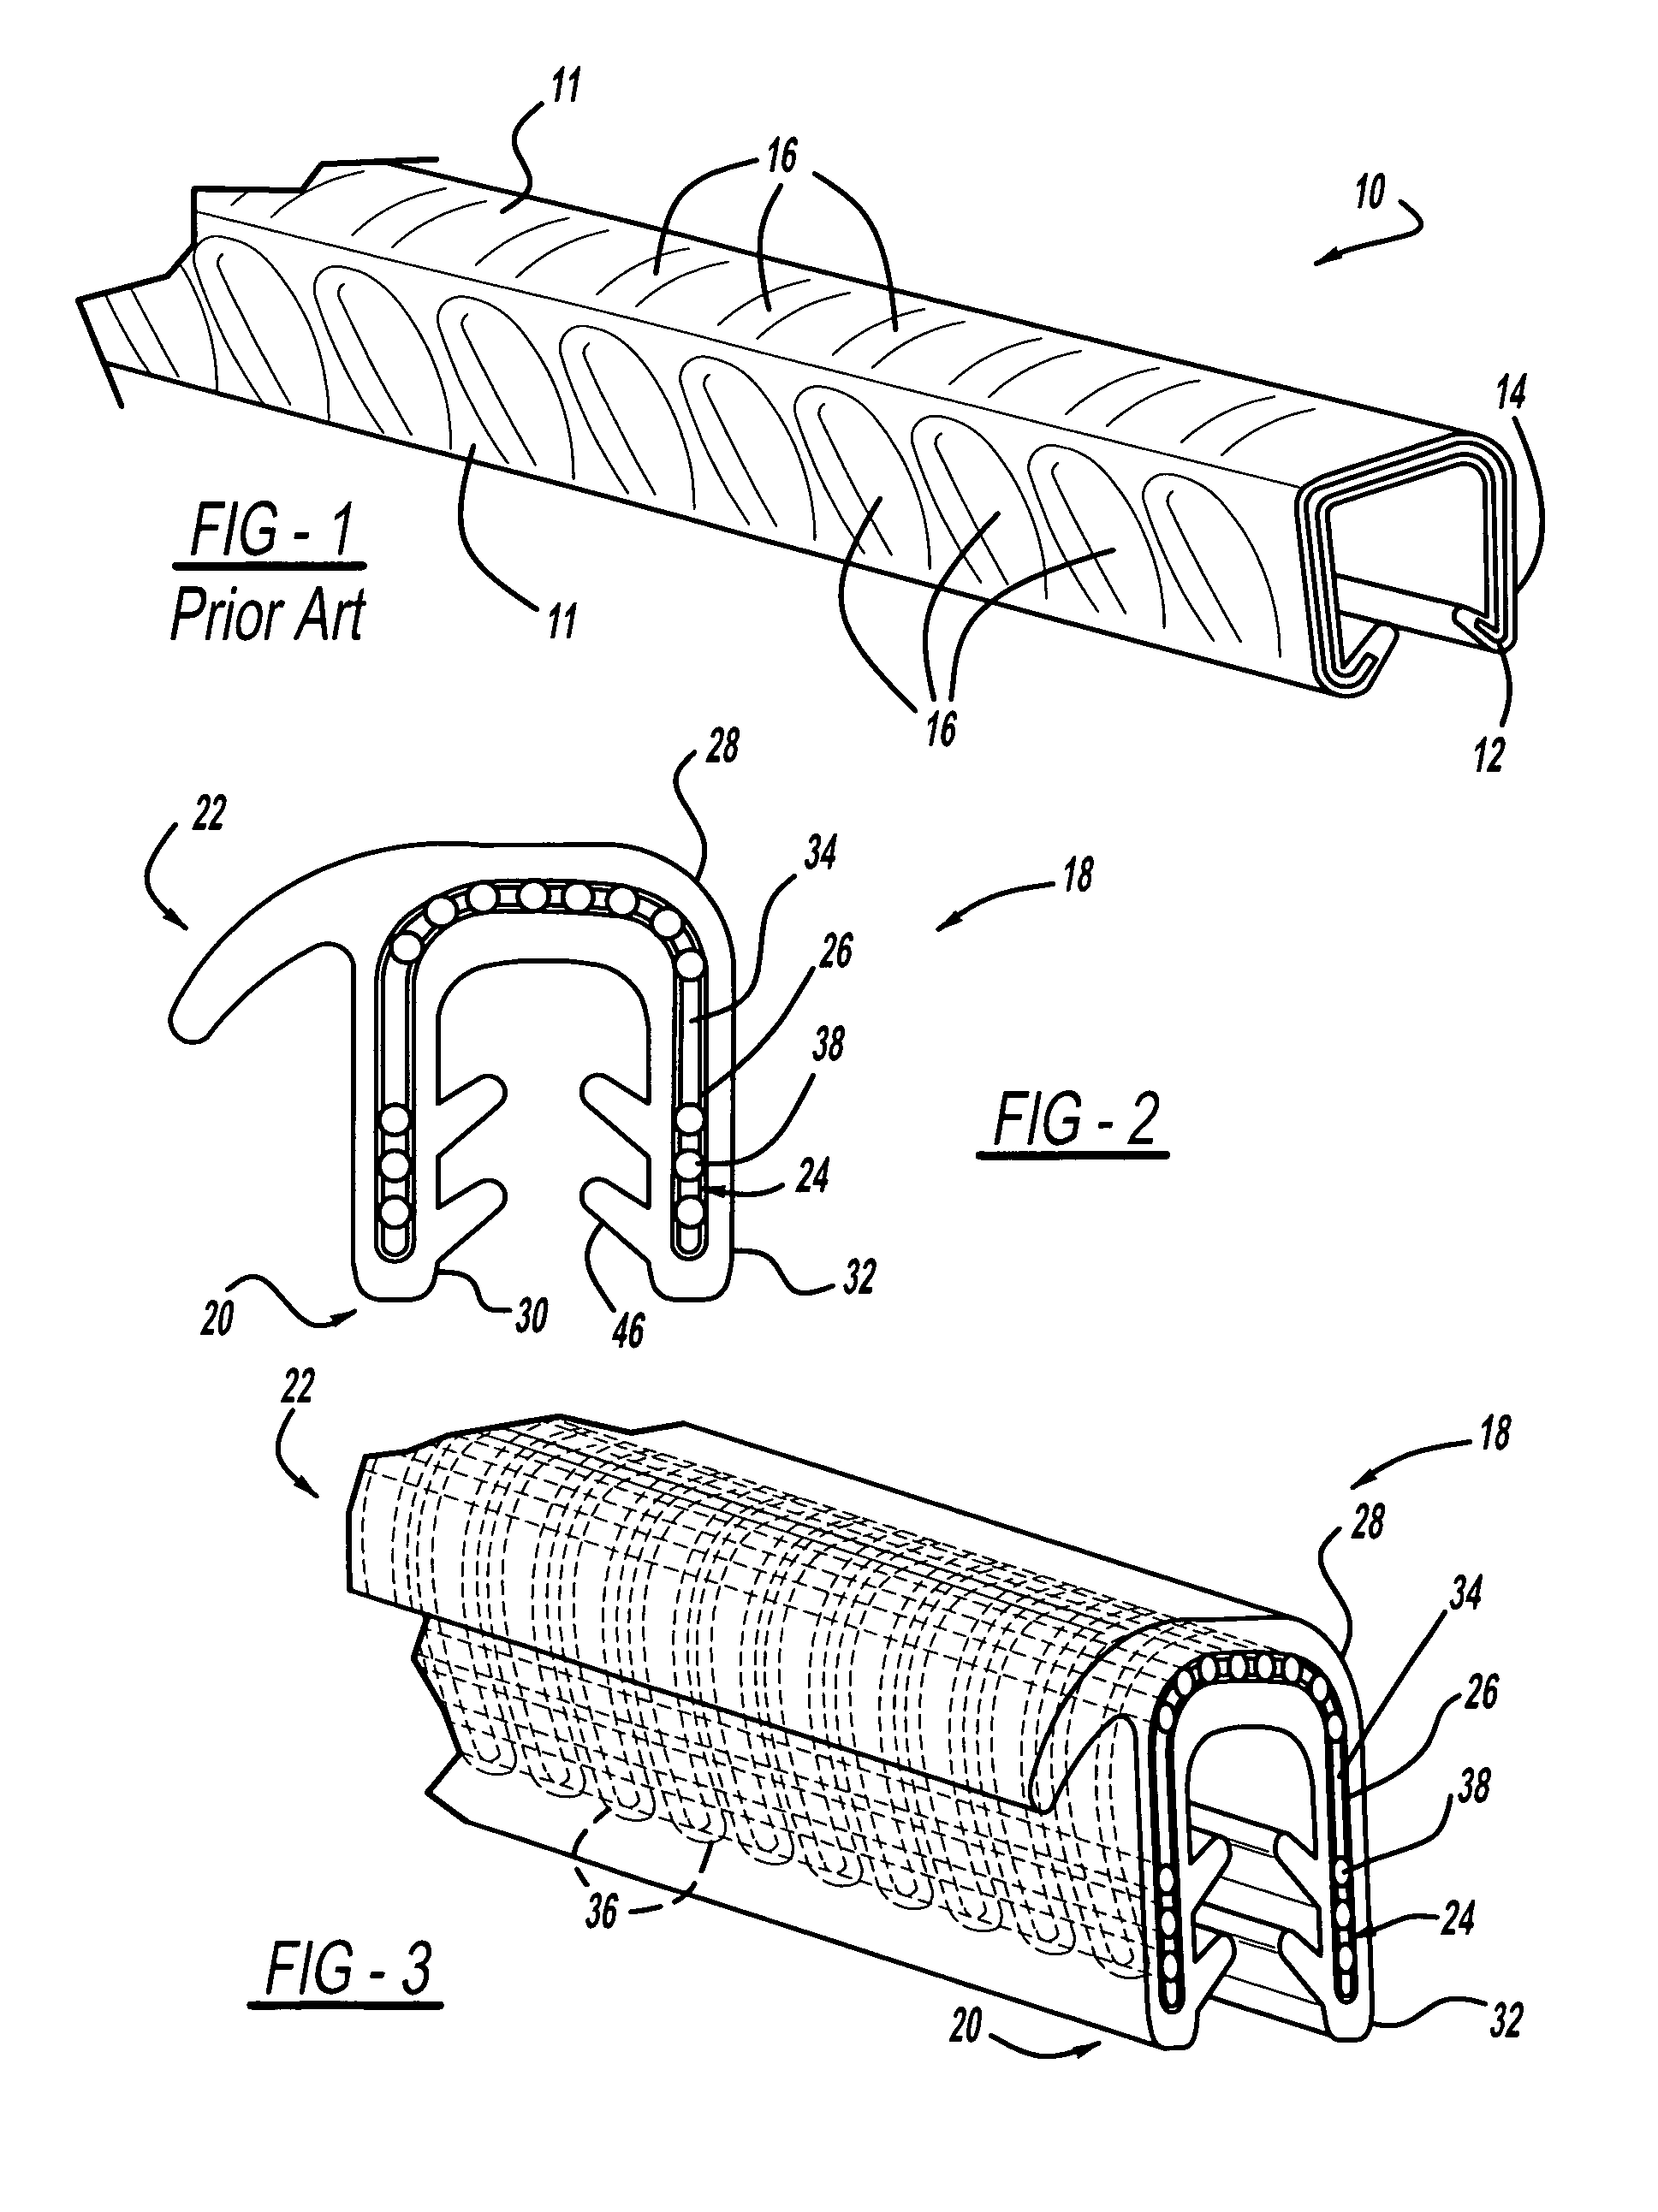 Reinforced extrusion and method for making same